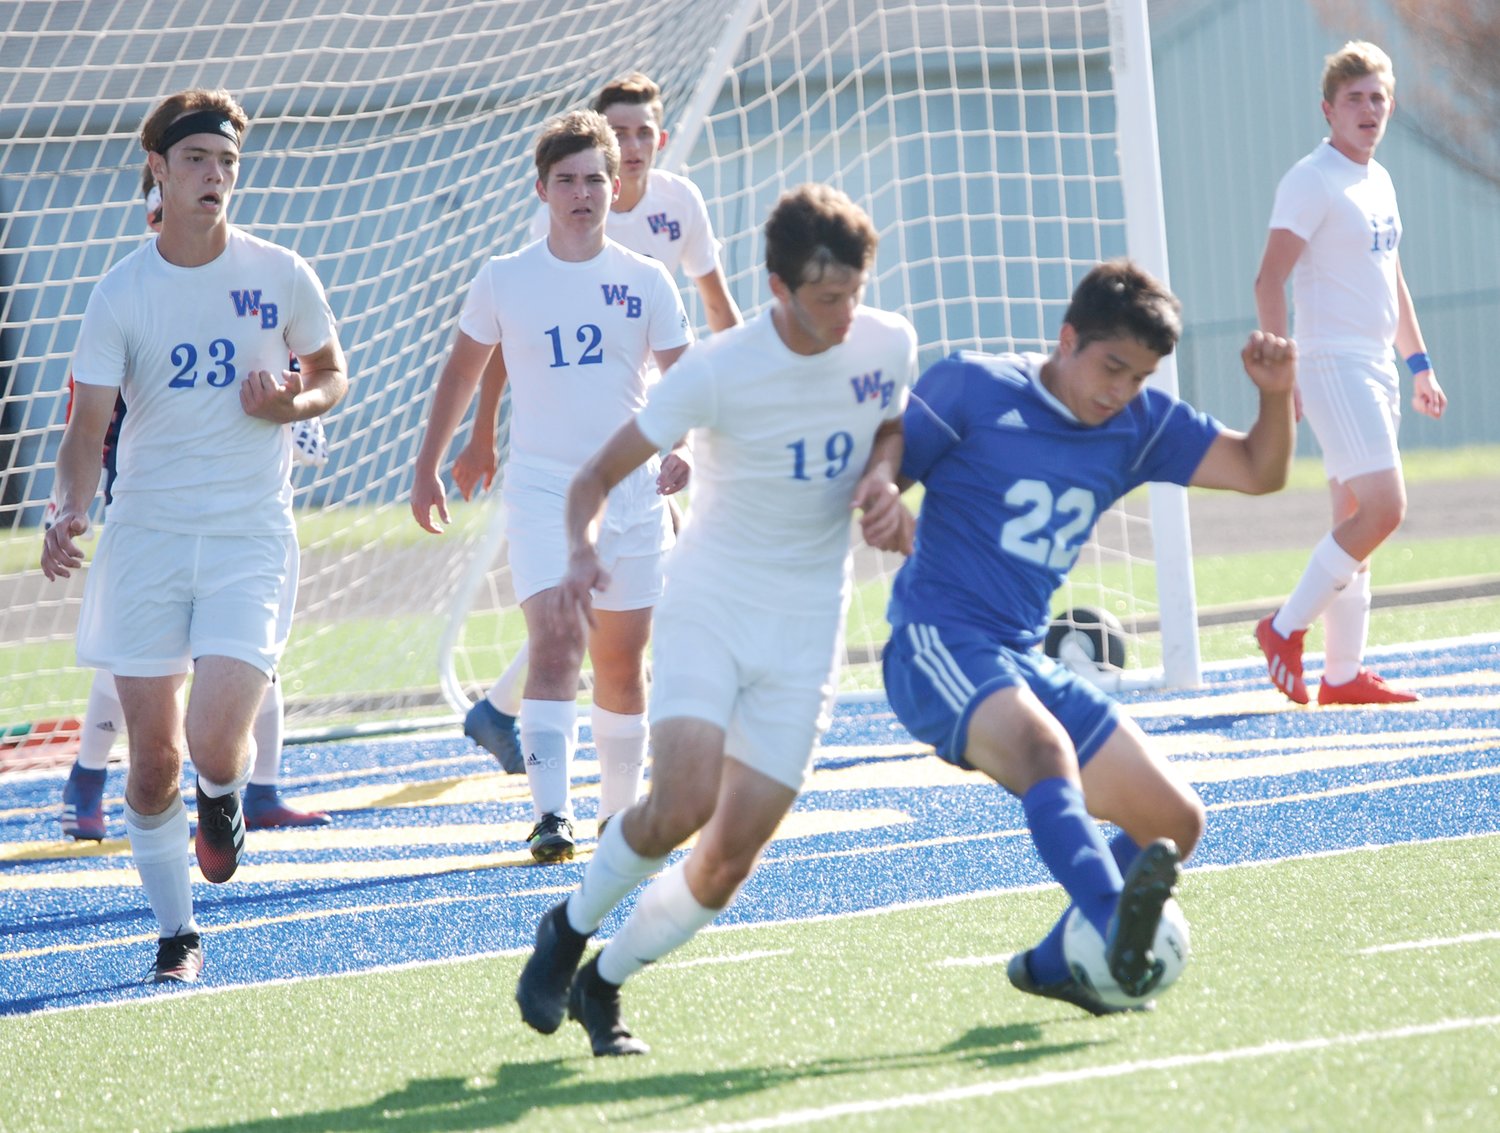 Edwin Gil-Herrera fights for position in Crawfordsville's win over Western Boone on Tuesday. The junior had a goal and an assist in the victory.